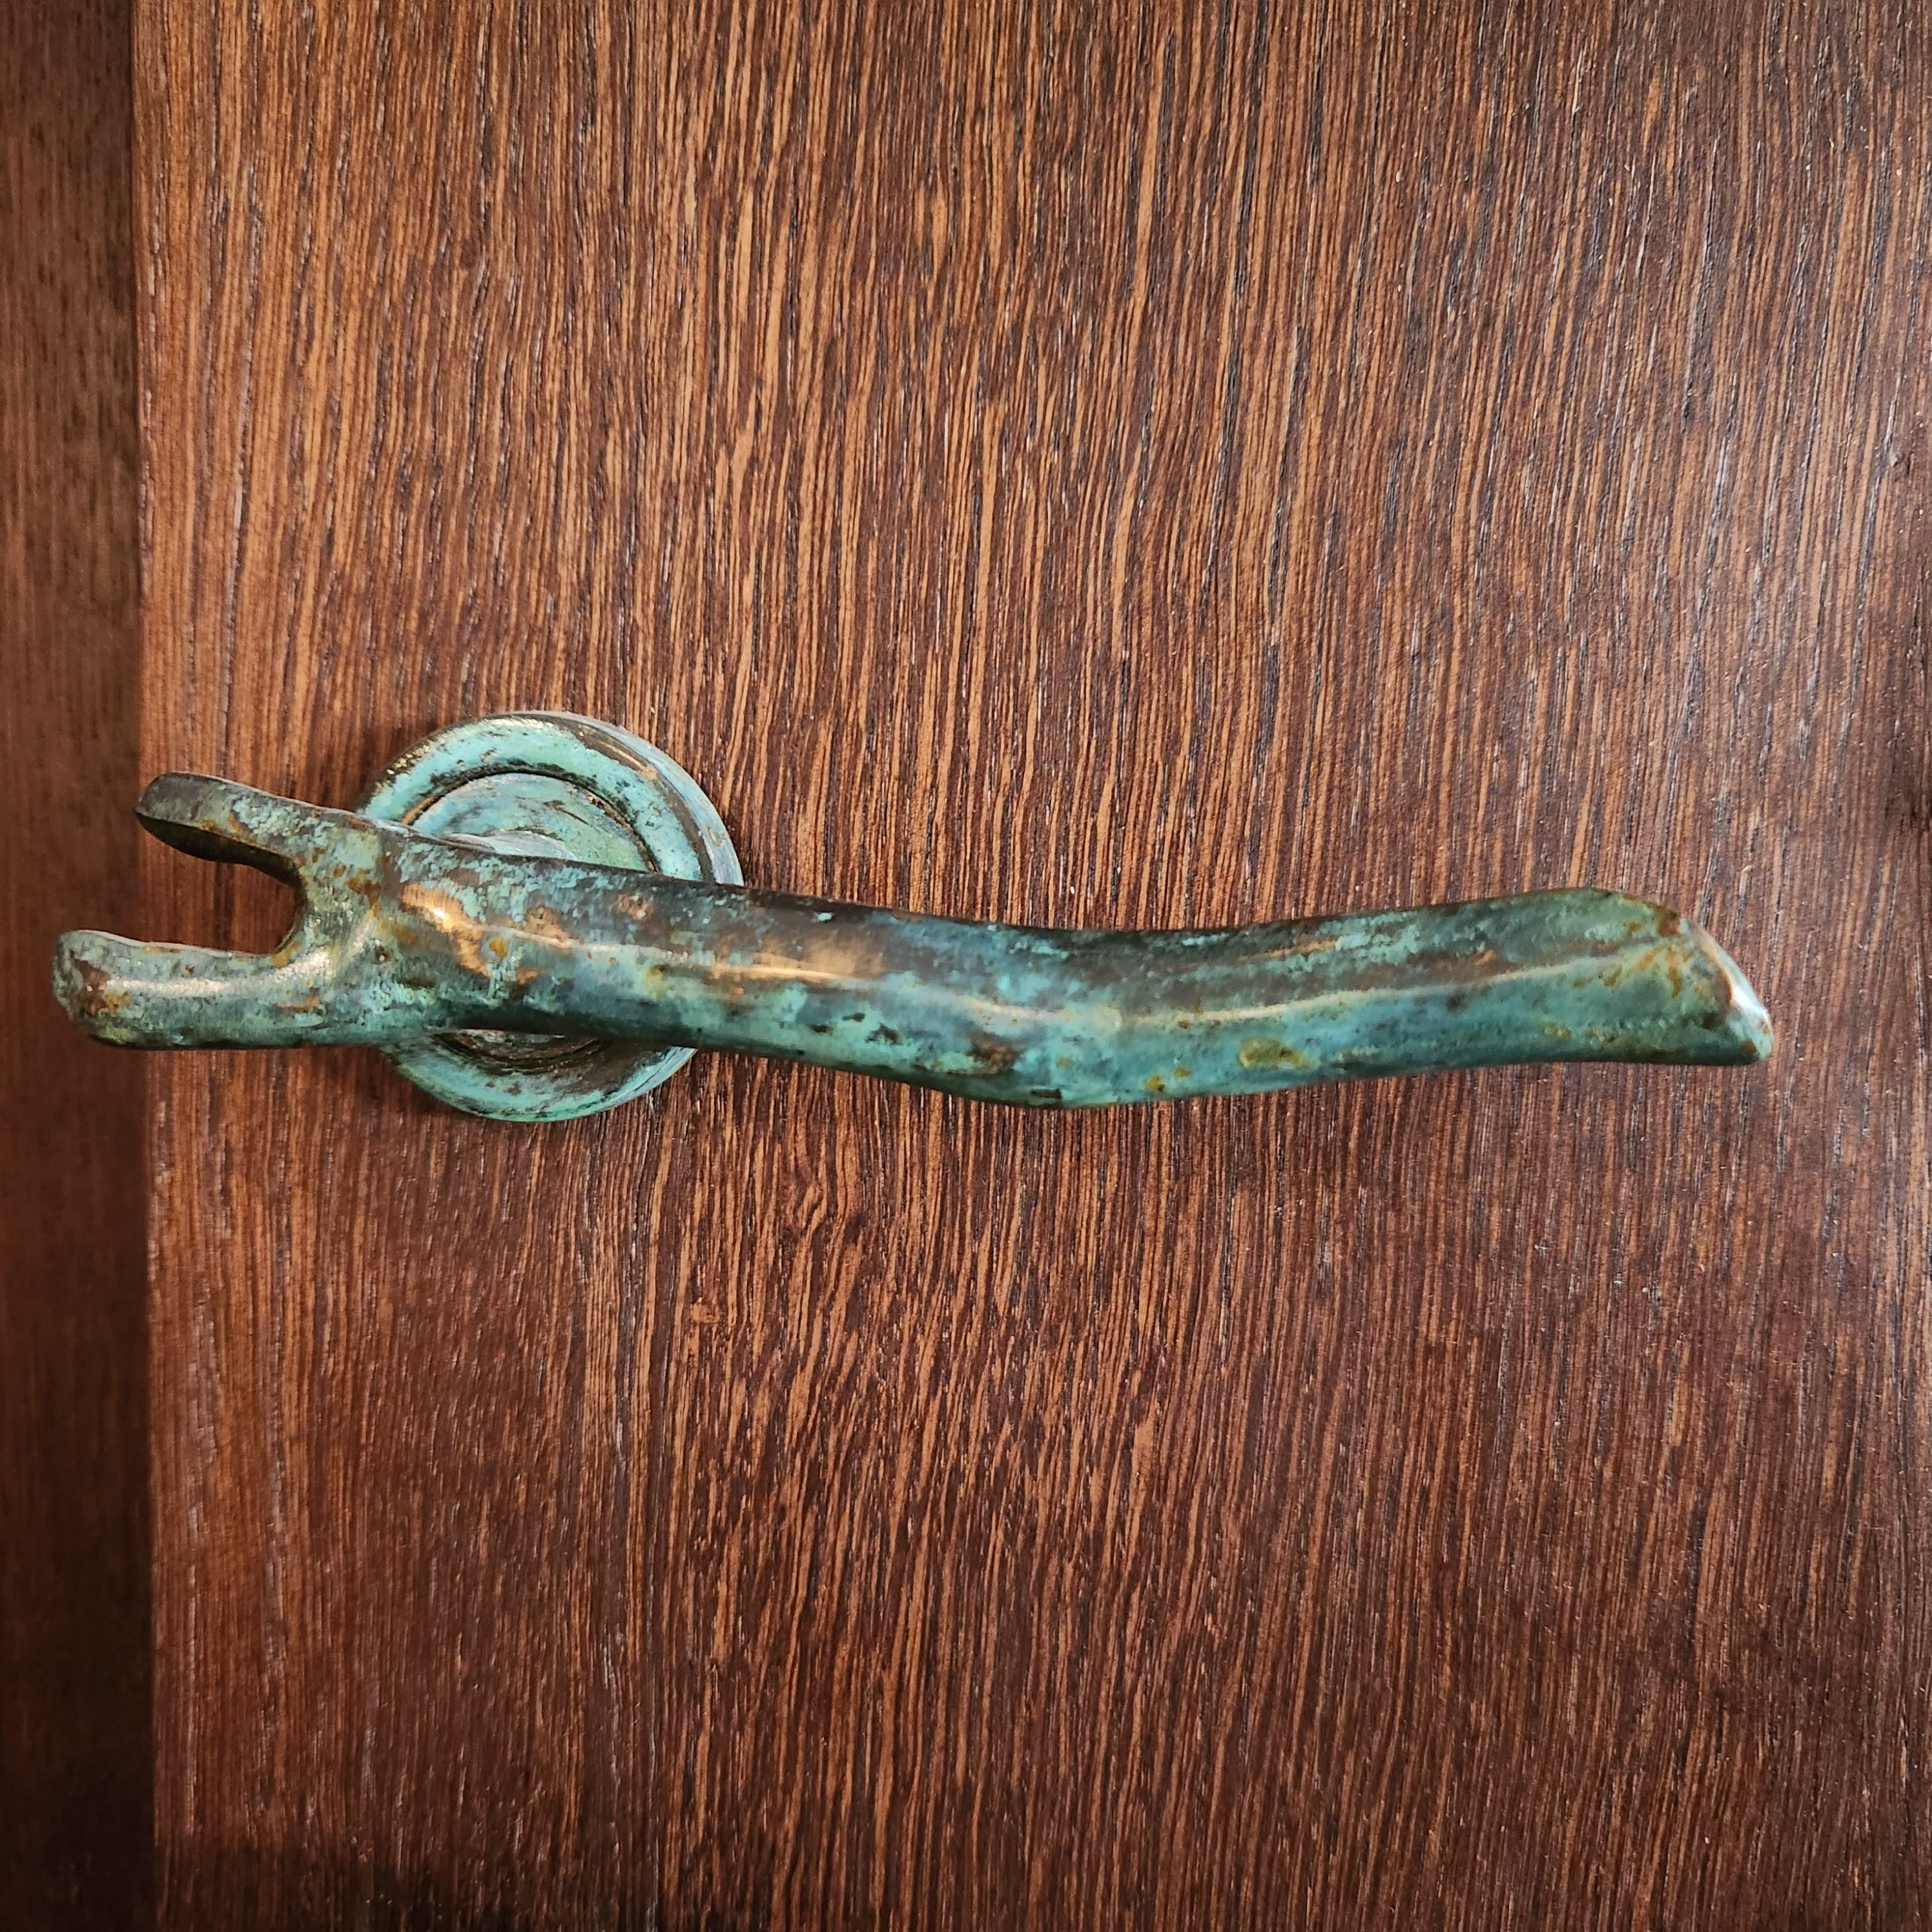 Pair of earth prints door handles in brass foundry. Tribute to nature, infinite source of patterns.